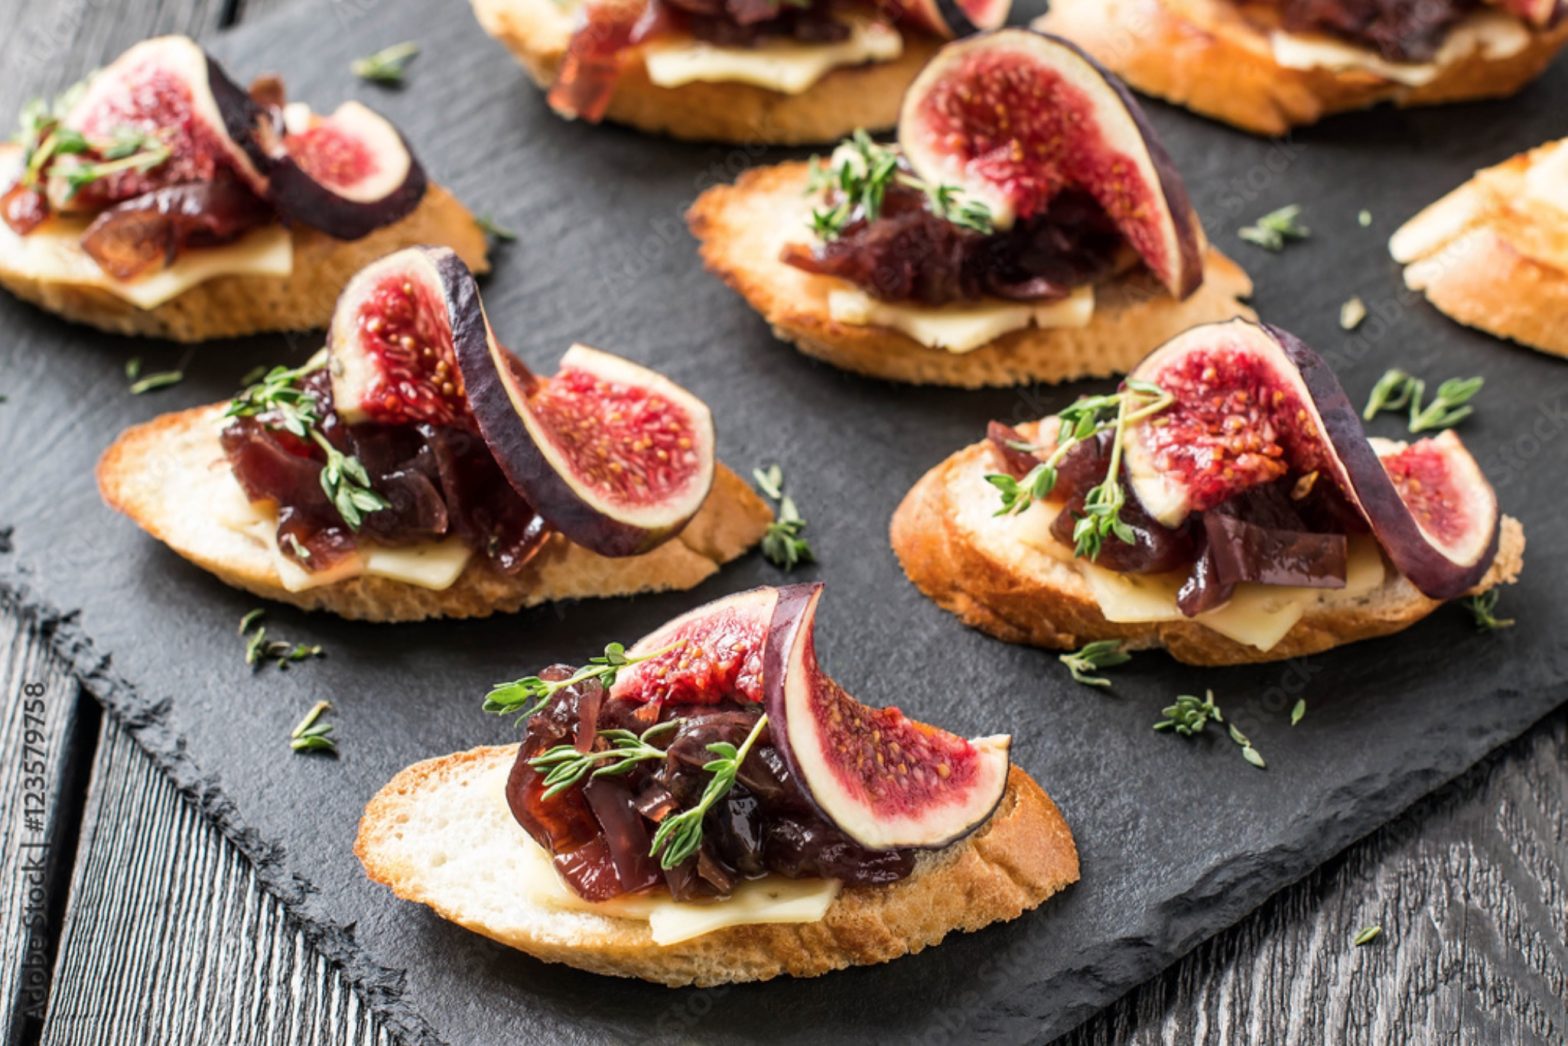 Canapé: A Bite-Sized Delight to Impress Your Guests